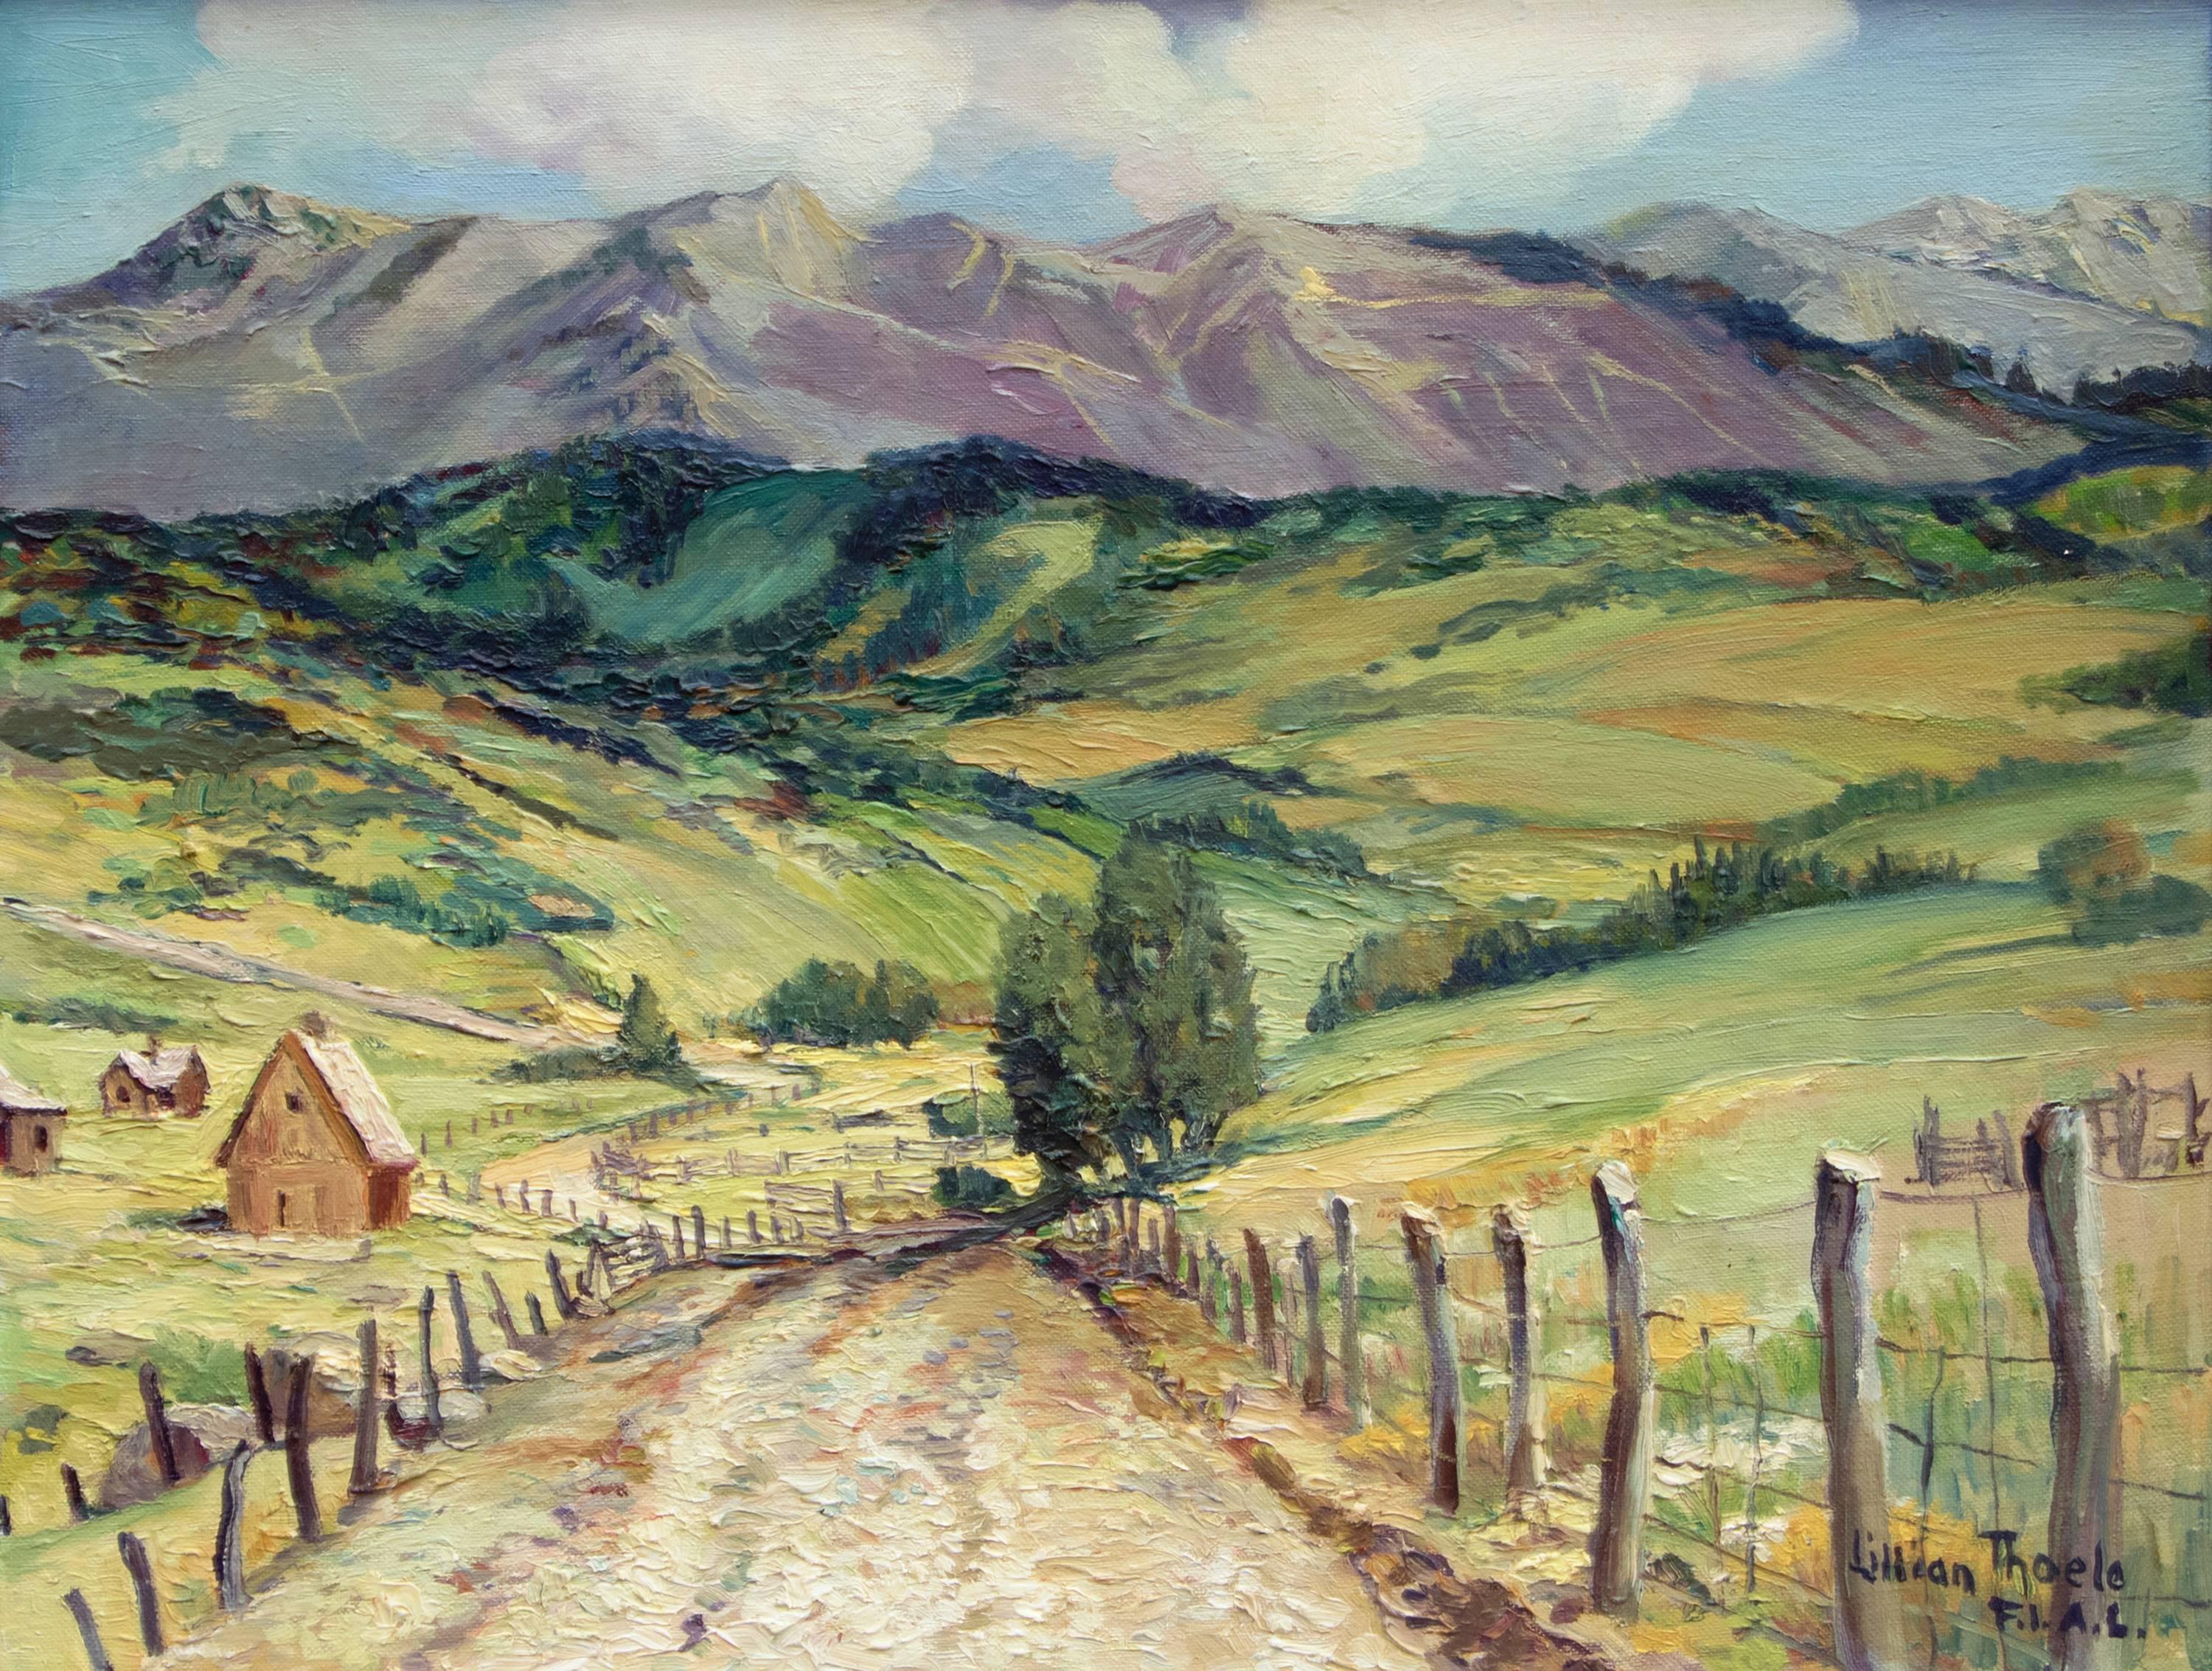 Airstrip Road - Mt. Telluride, Colorado - Painting by Lillian Thoele